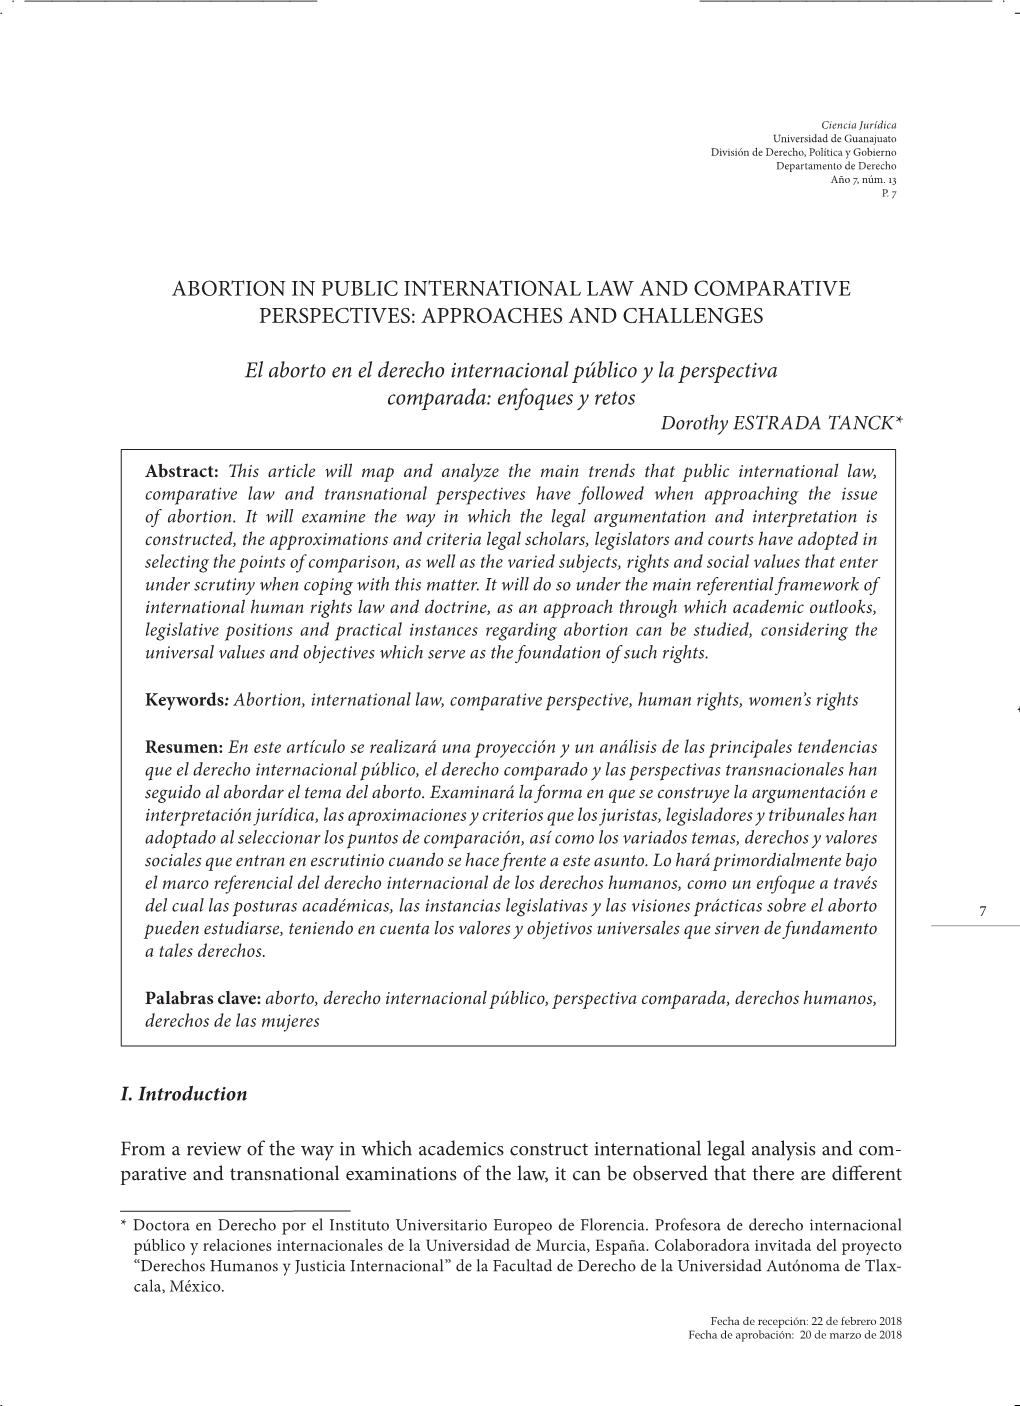 Abortion in Public International Law and Comparative Perspectives: Approaches and Challenges